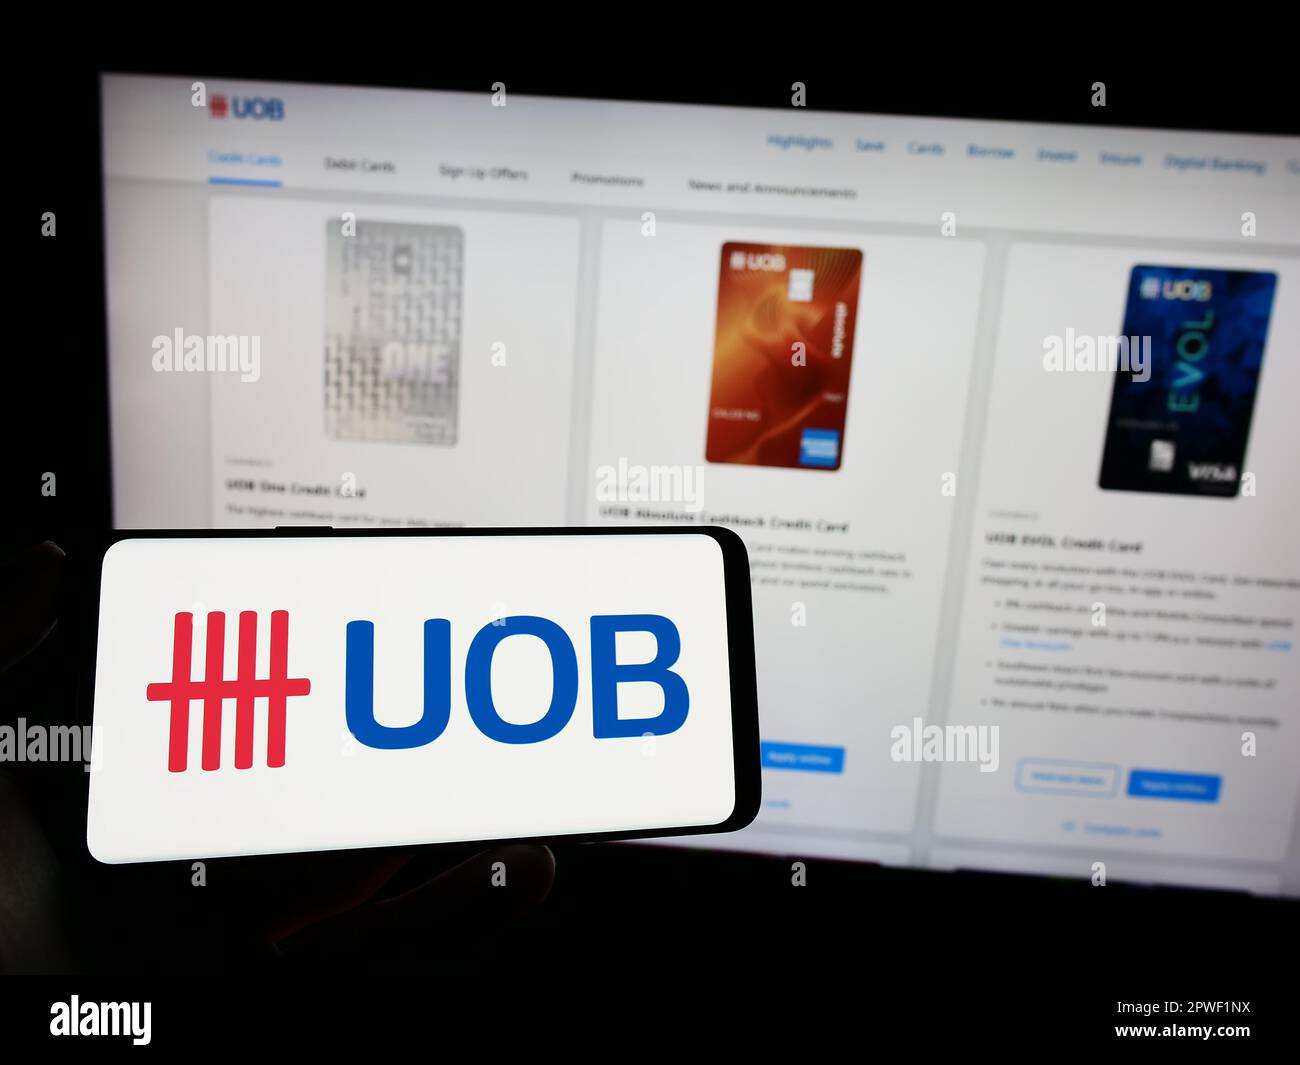 Person holding cellphone with logo of company United Overseas Bank Limited (UOB) on screen in front of business webpage. Focus on phone display. Stock Photo